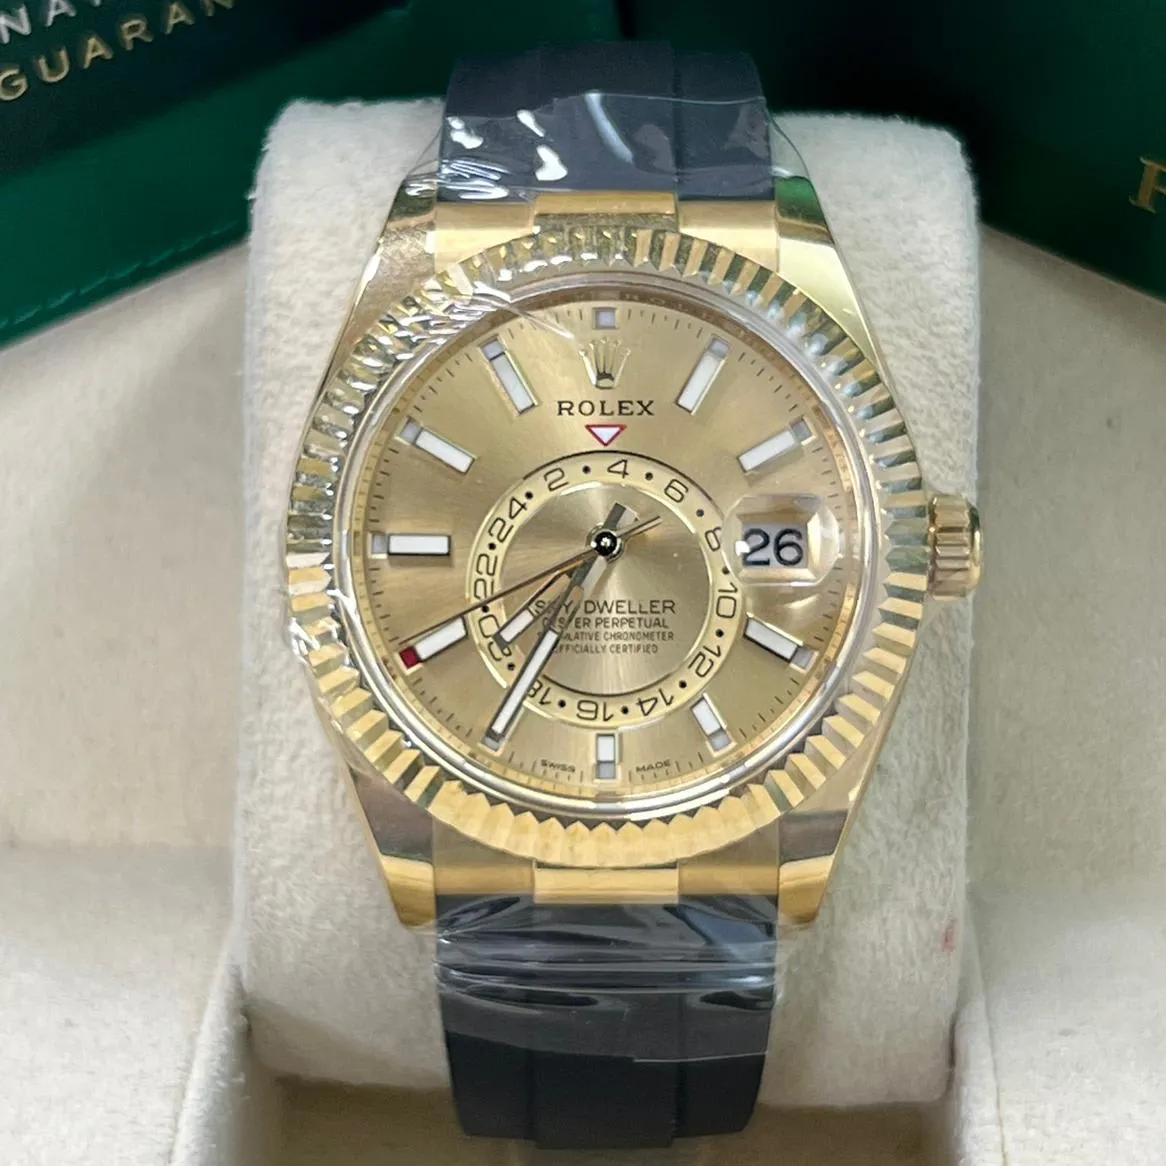 Rolex Sky-Dweller 326238-0007 42mm Yellow gold Champagne